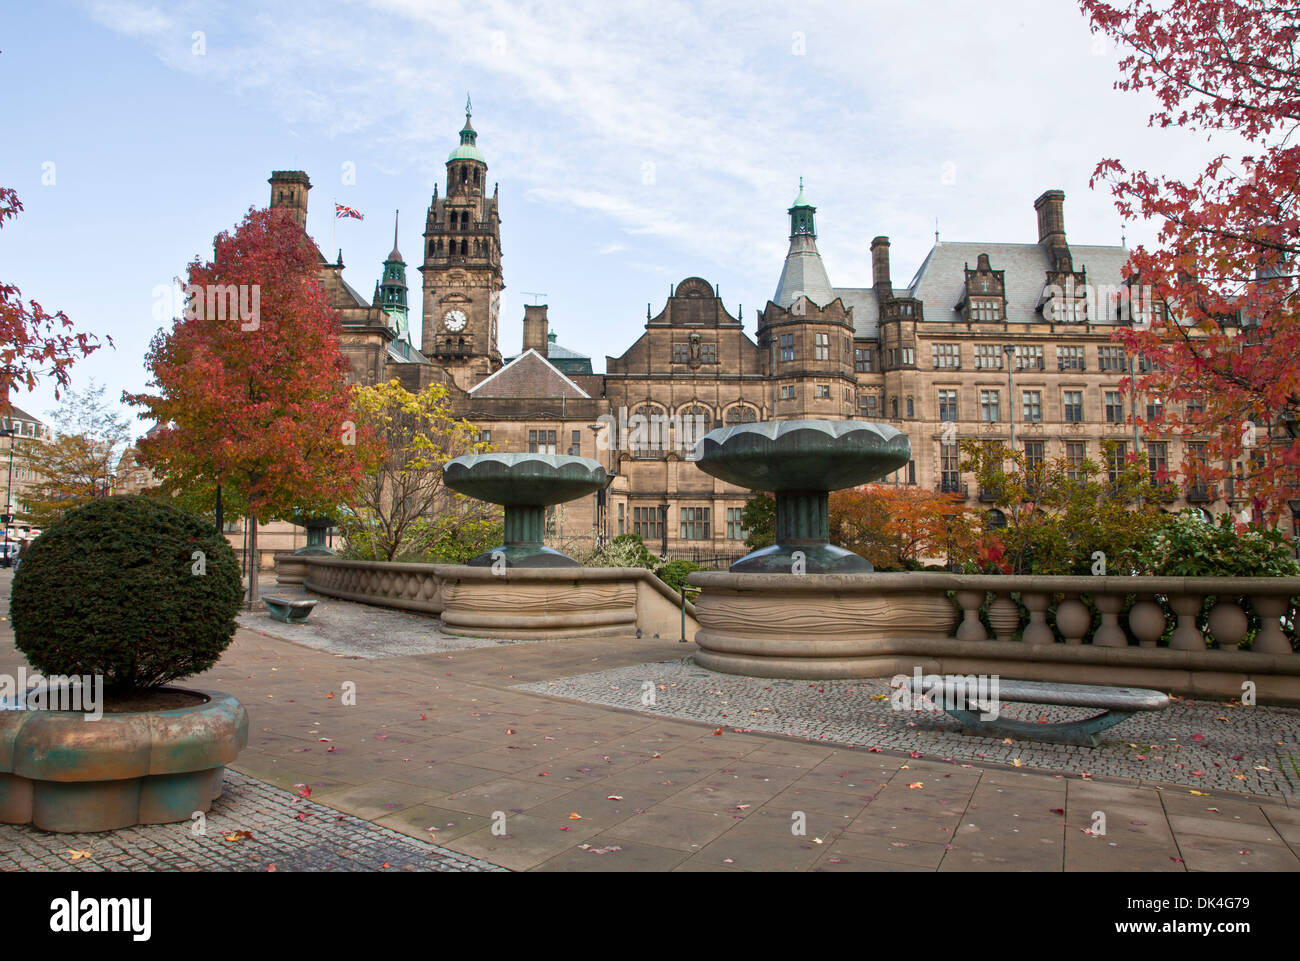 URBAN DESIGN AND LANDSCAPING AT THE PEACE GARDENS AND TOWN HALL SHEFFIELD ENGLAND Stock Photo